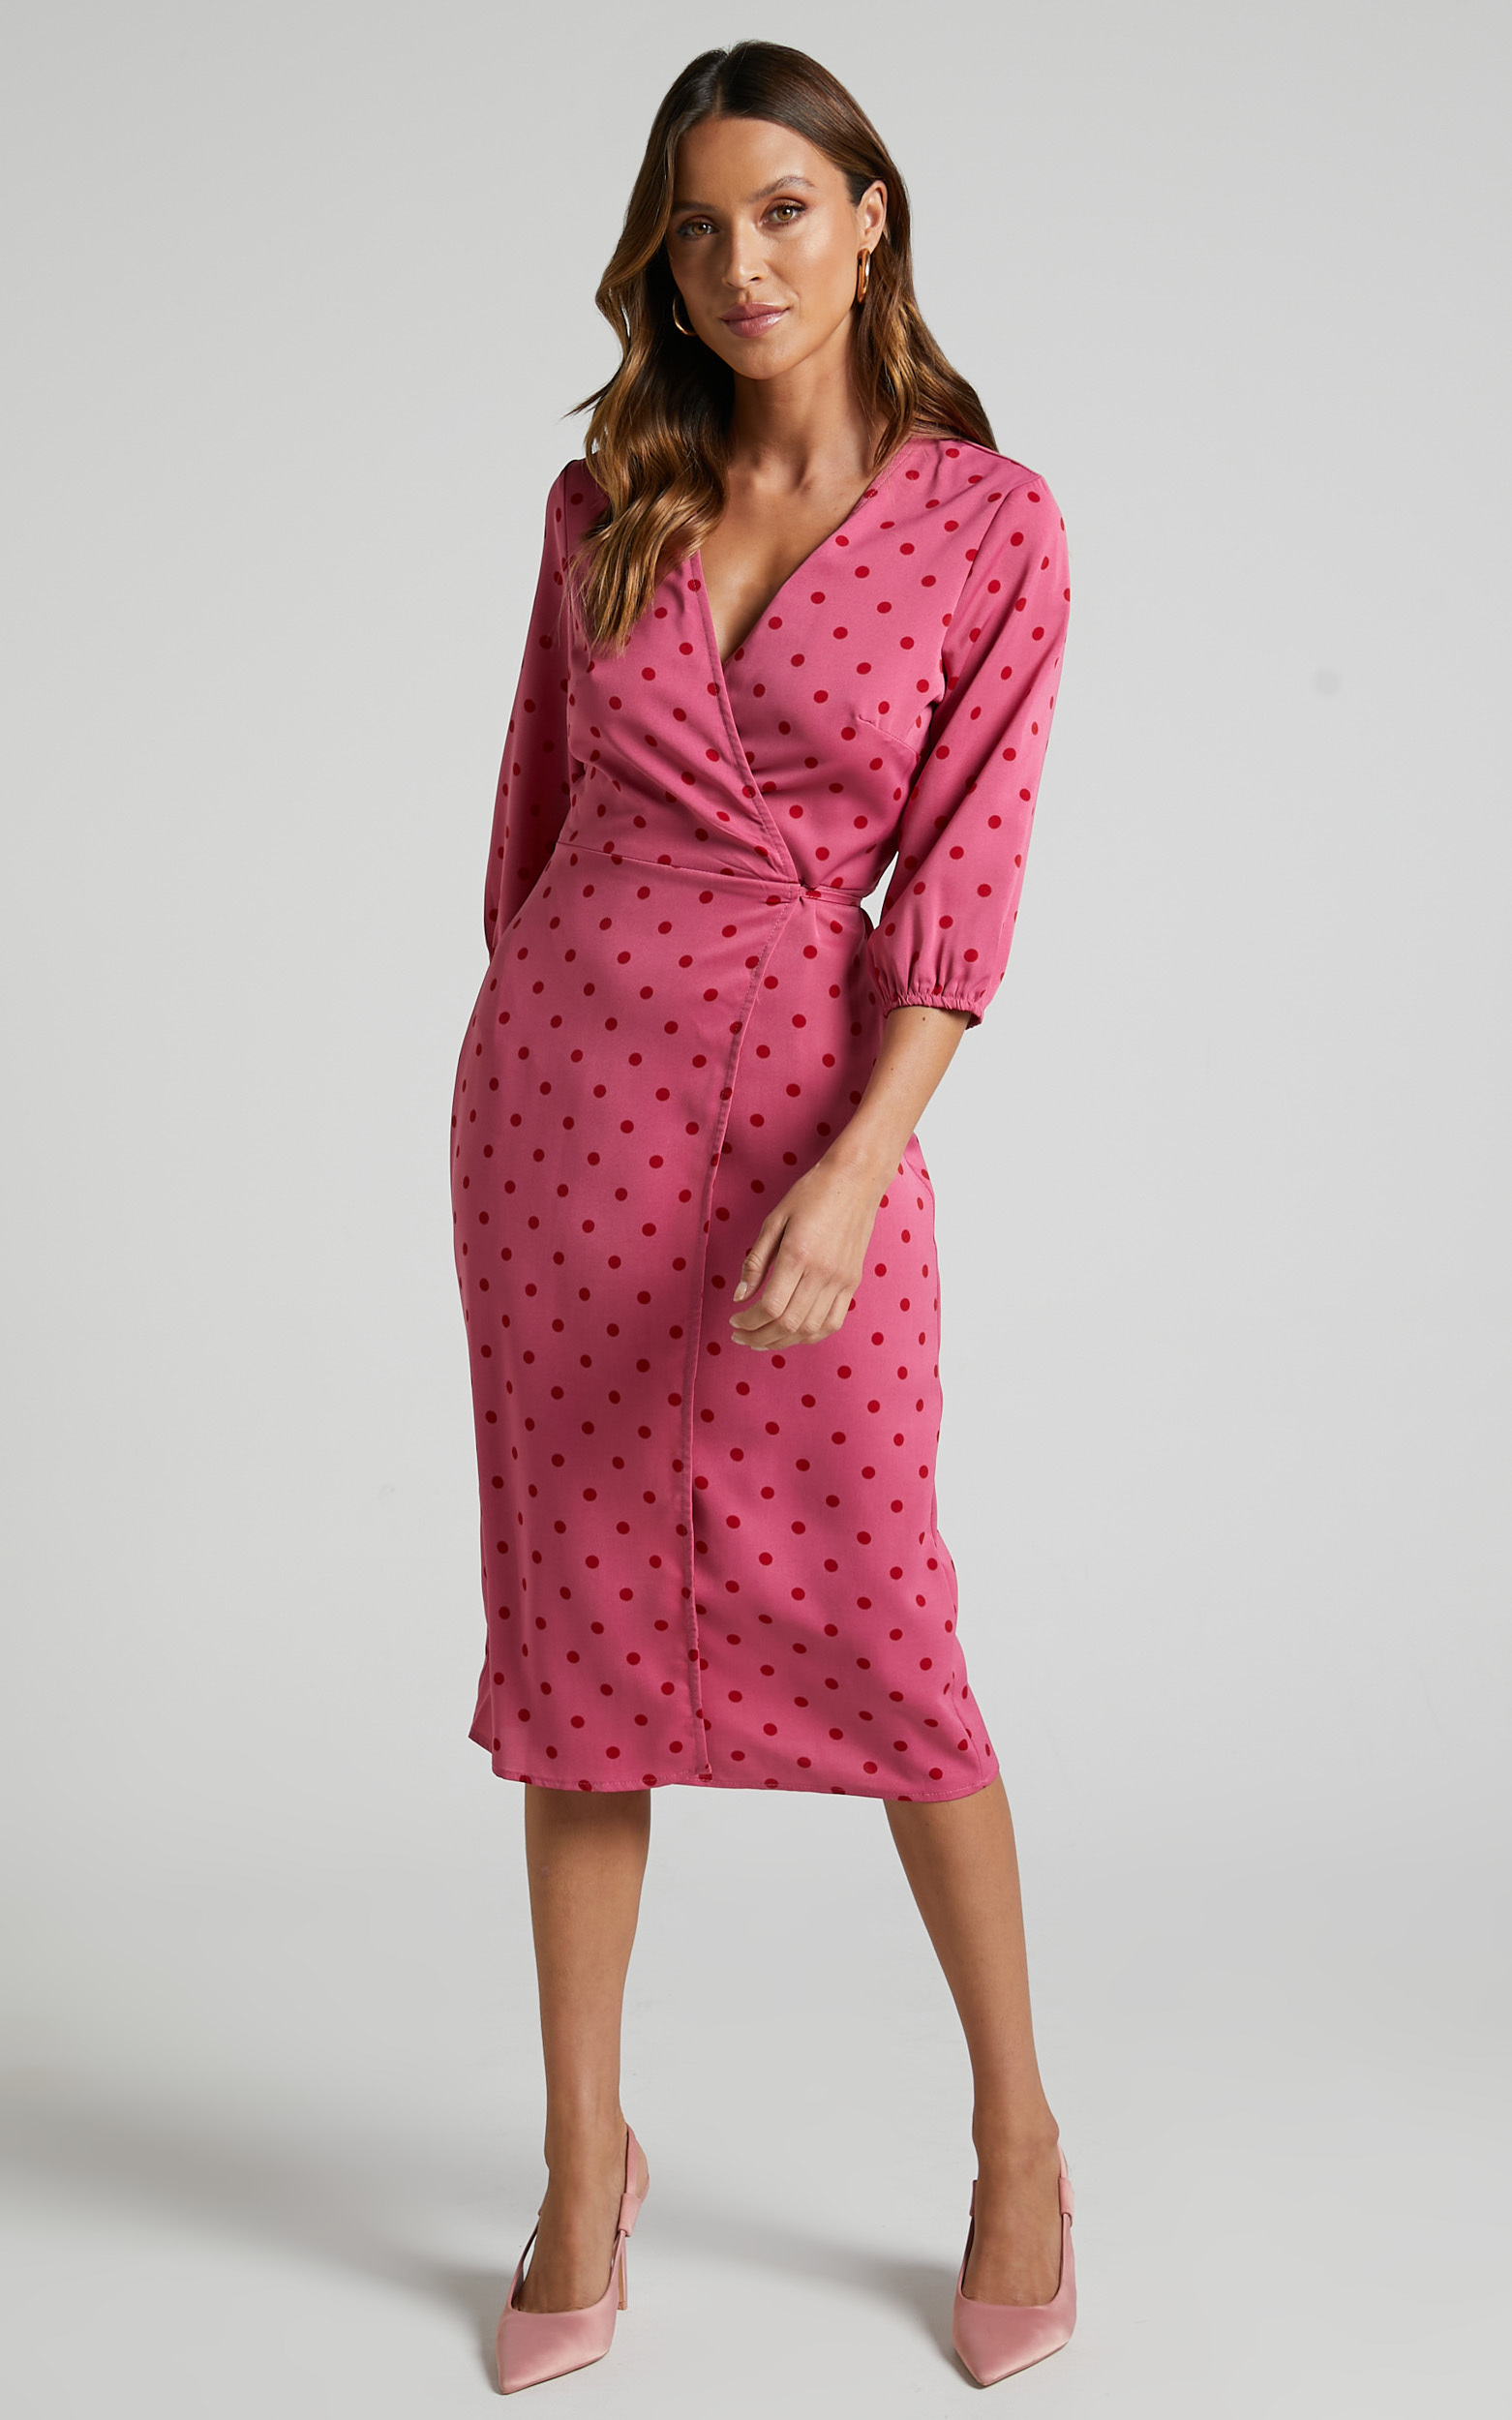 Bethrix 3/4 Sleeve Wrap Midi Dress in Pink and Red Polka Dot - 04, PNK1, hi-res image number null